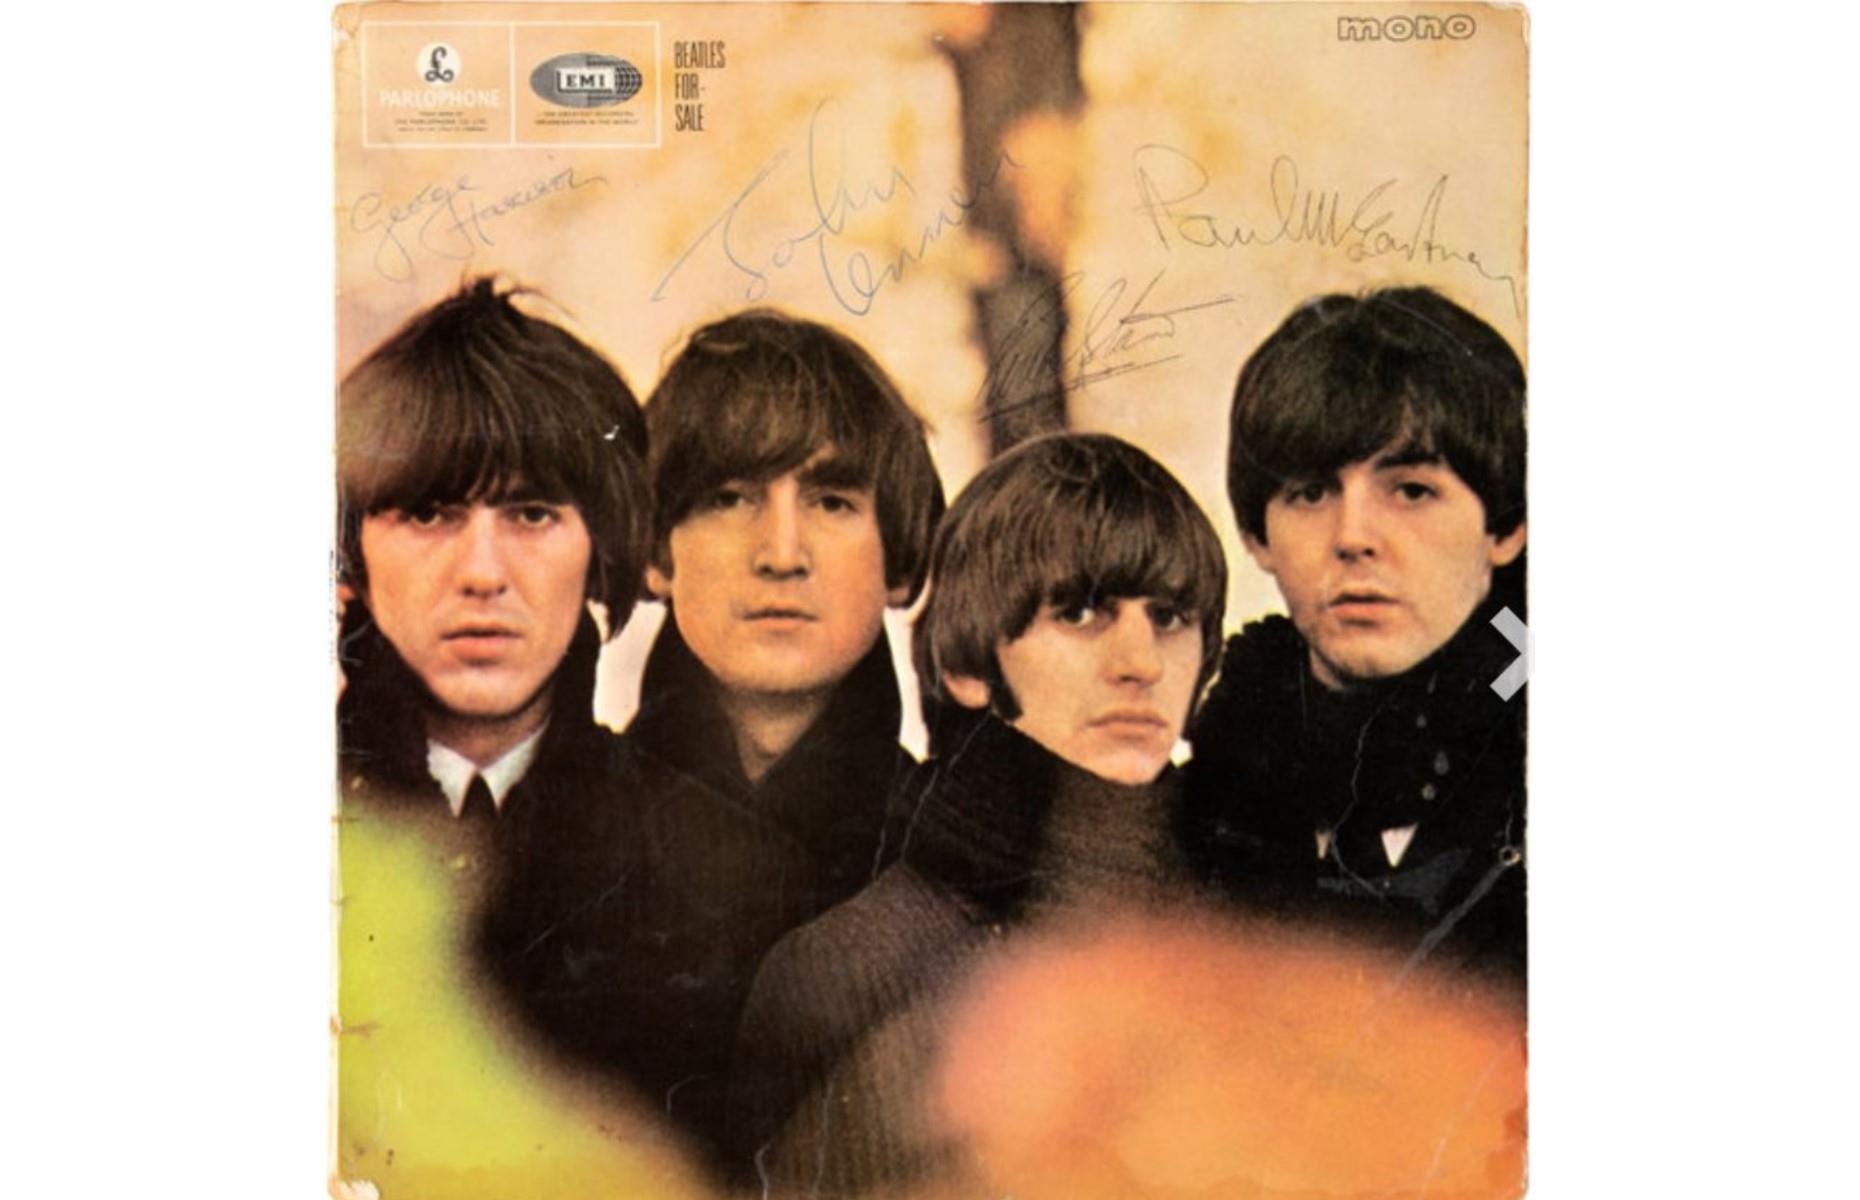 The Beatles – Beatles for Sale: $20,000 (£16,958)